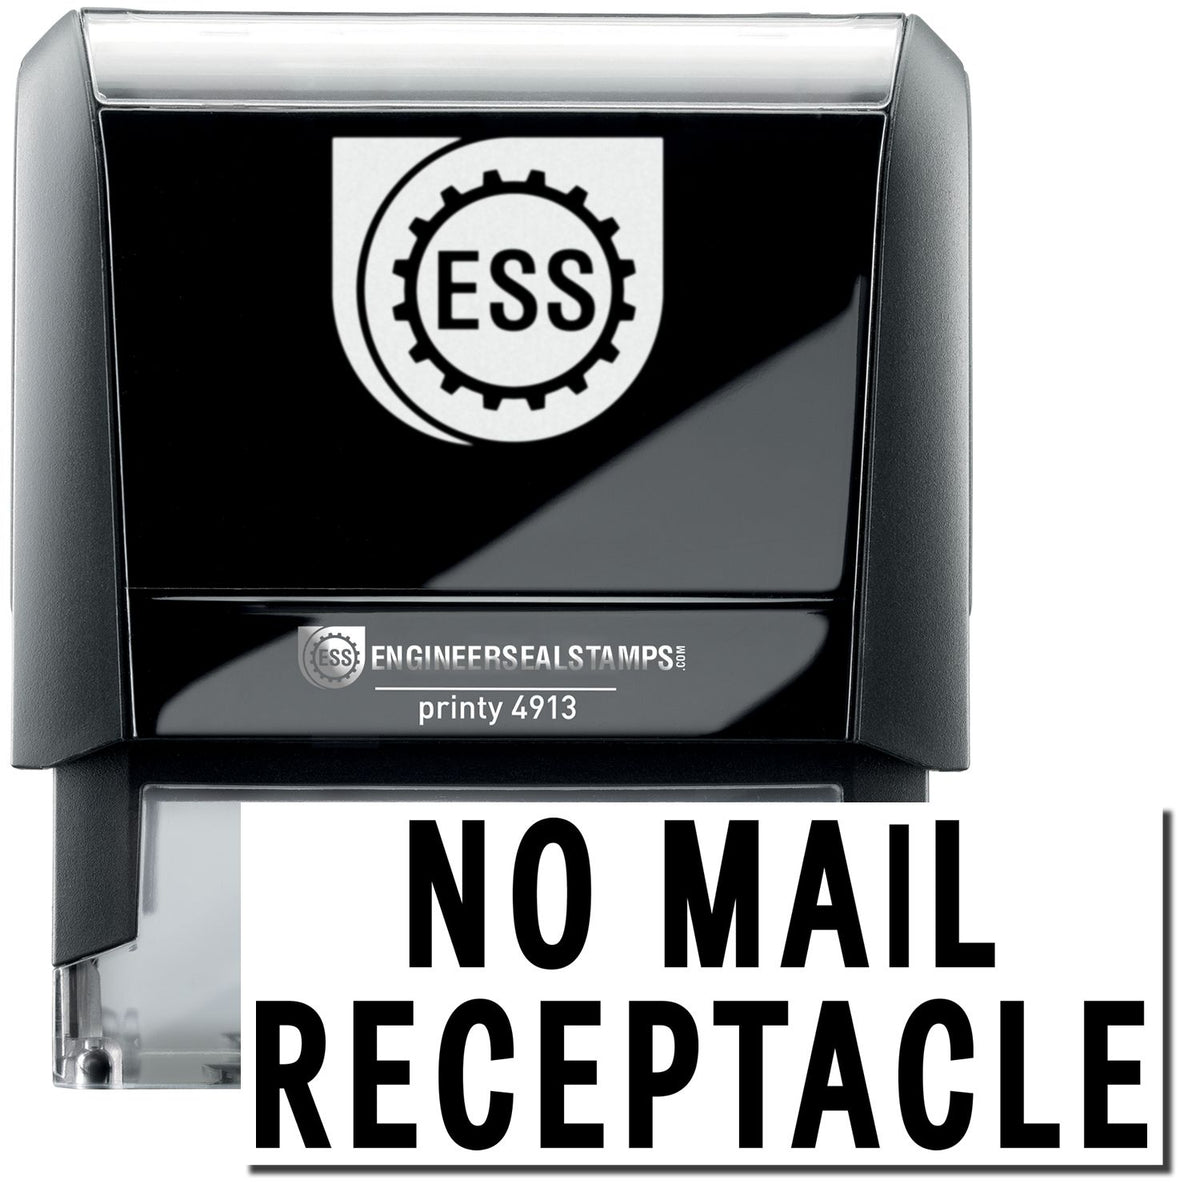 A self-inking stamp with a stamped image showing how the text &quot;NO MAIL RECEPTACLE&quot; in a large font is displayed by it after stamping.